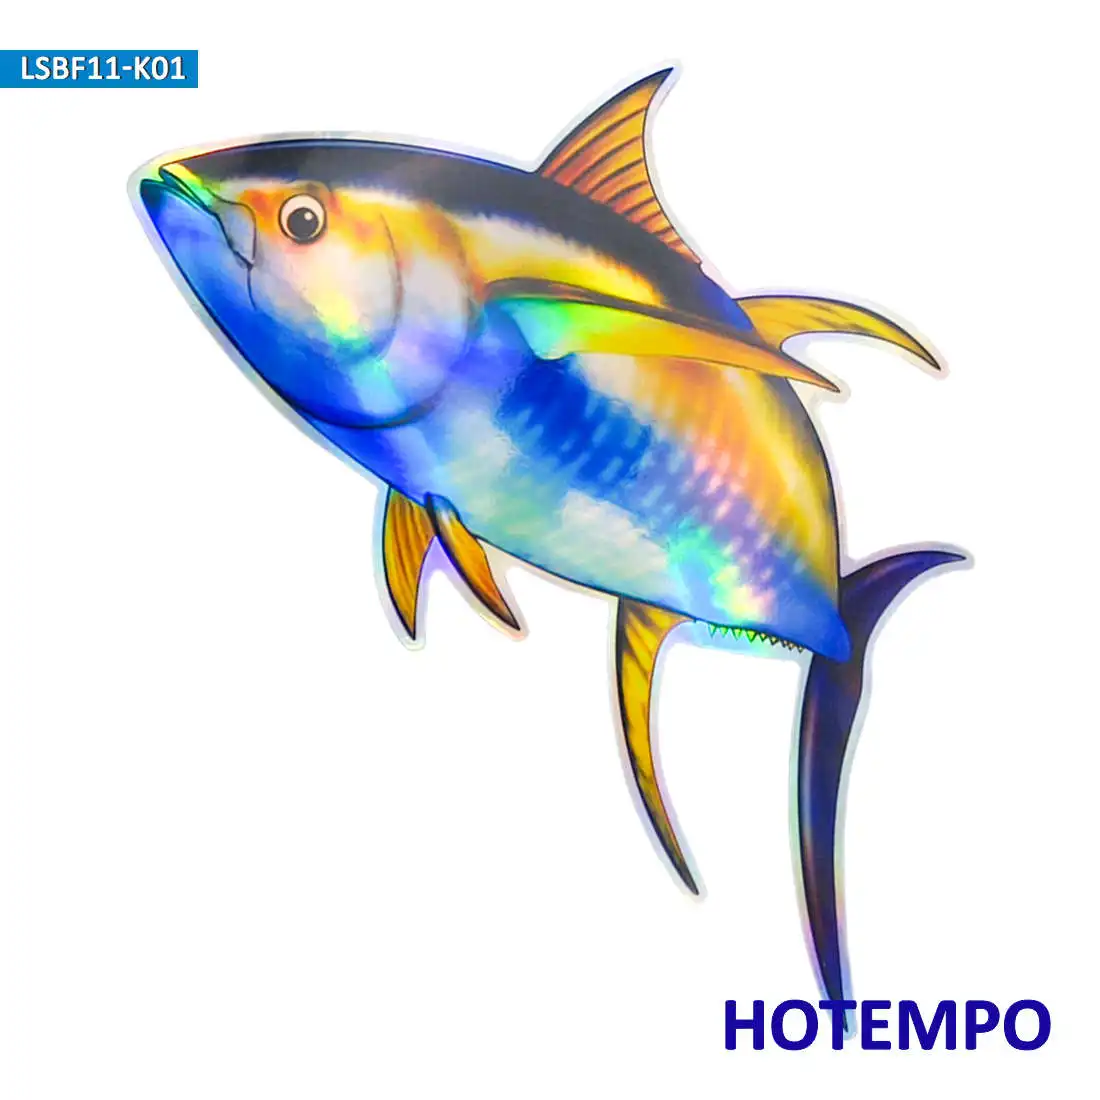 20cm Laser Dazzle Big Size Sea Fish Yellowfin Tuna Motorcycle Car Stickers for Fisherman Boats Laptop Outdoor Waterproof Sticker